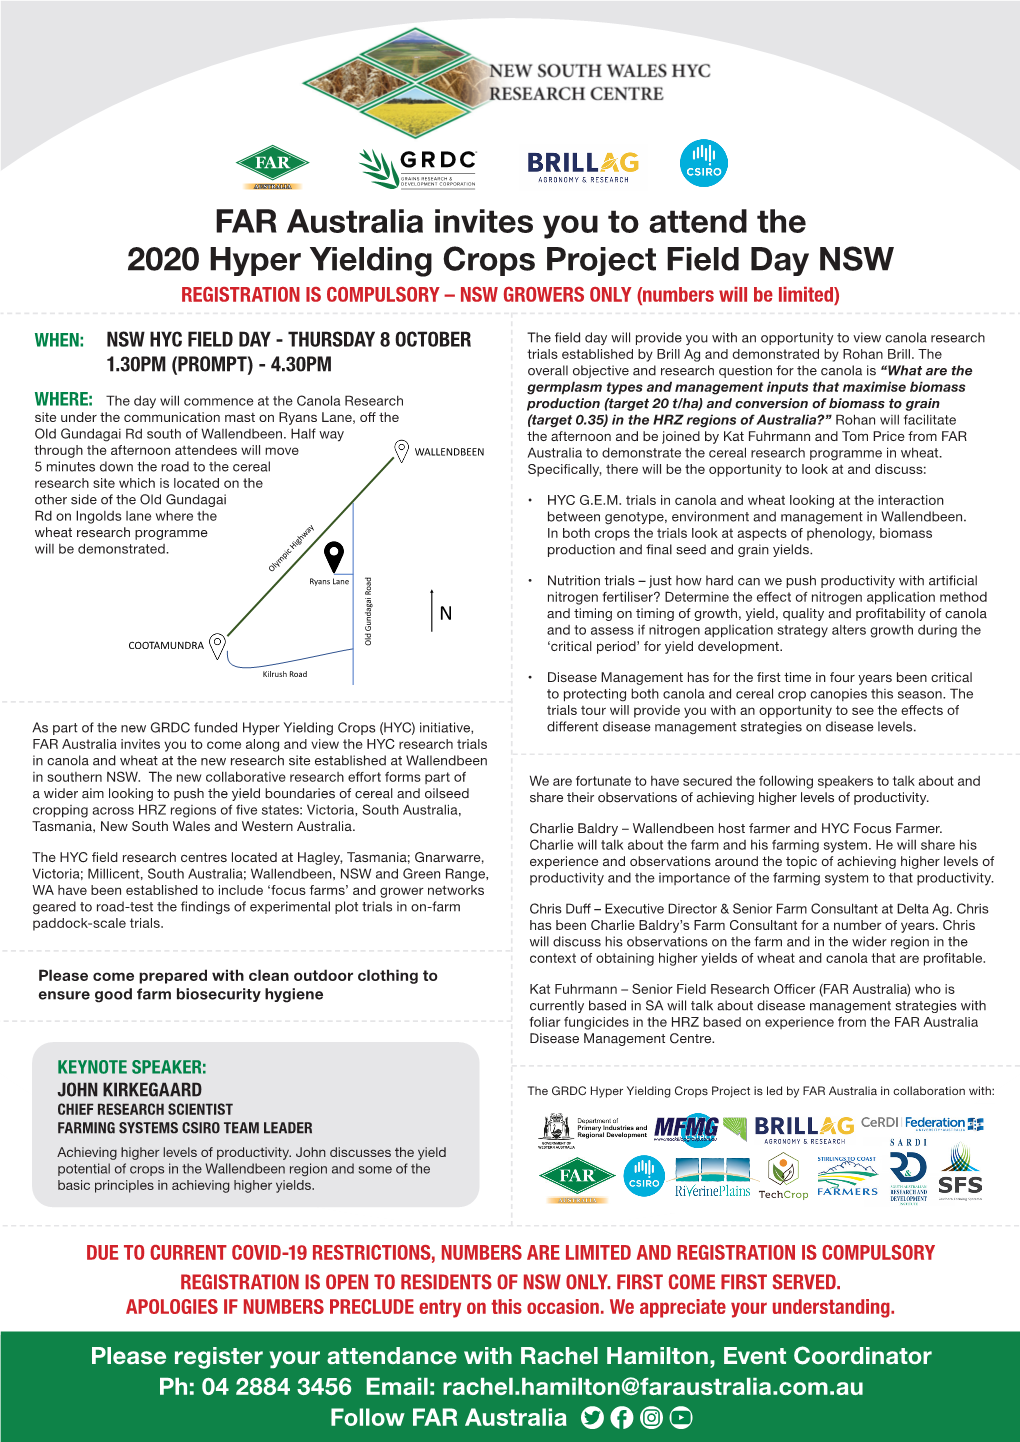 FAR Australia Invites You to Attend the 2020 Hyper Yielding Crops Project Field Day NSW REGISTRATION IS COMPULSORY – NSW GROWERS ONLY (Numbers Will Be Limited)